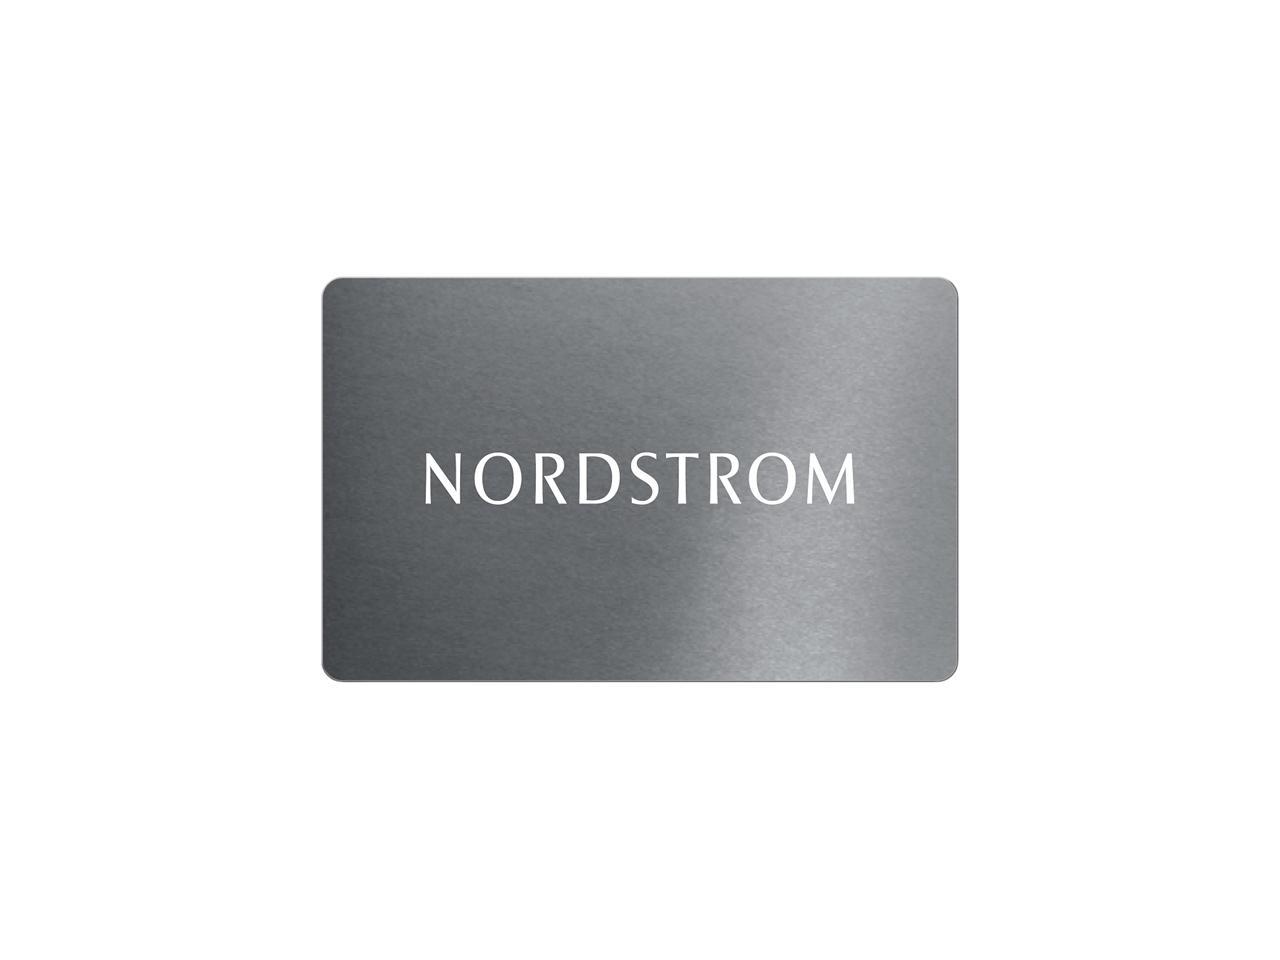 $50 Nordstrom Gift Card + Free $10 Gift Card